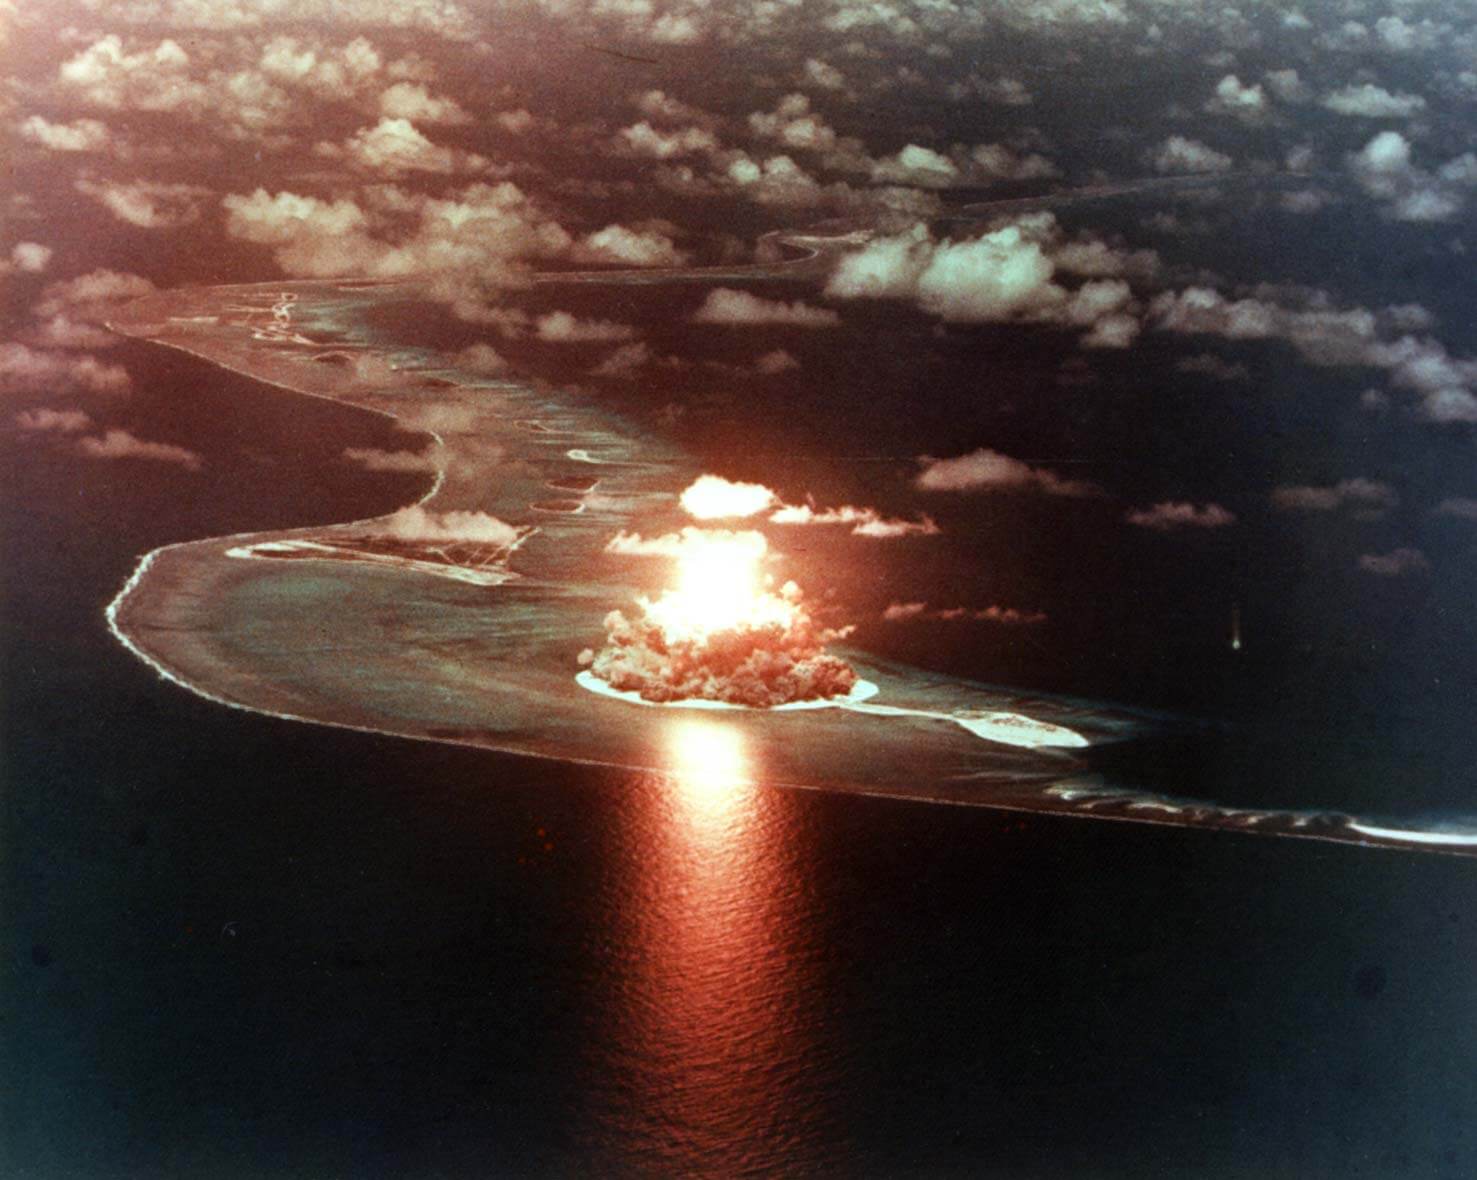 US nuclear weapons test at Eniwetok in 1956. © International Campaign to Abolish Nuclear Weapons/Flickr